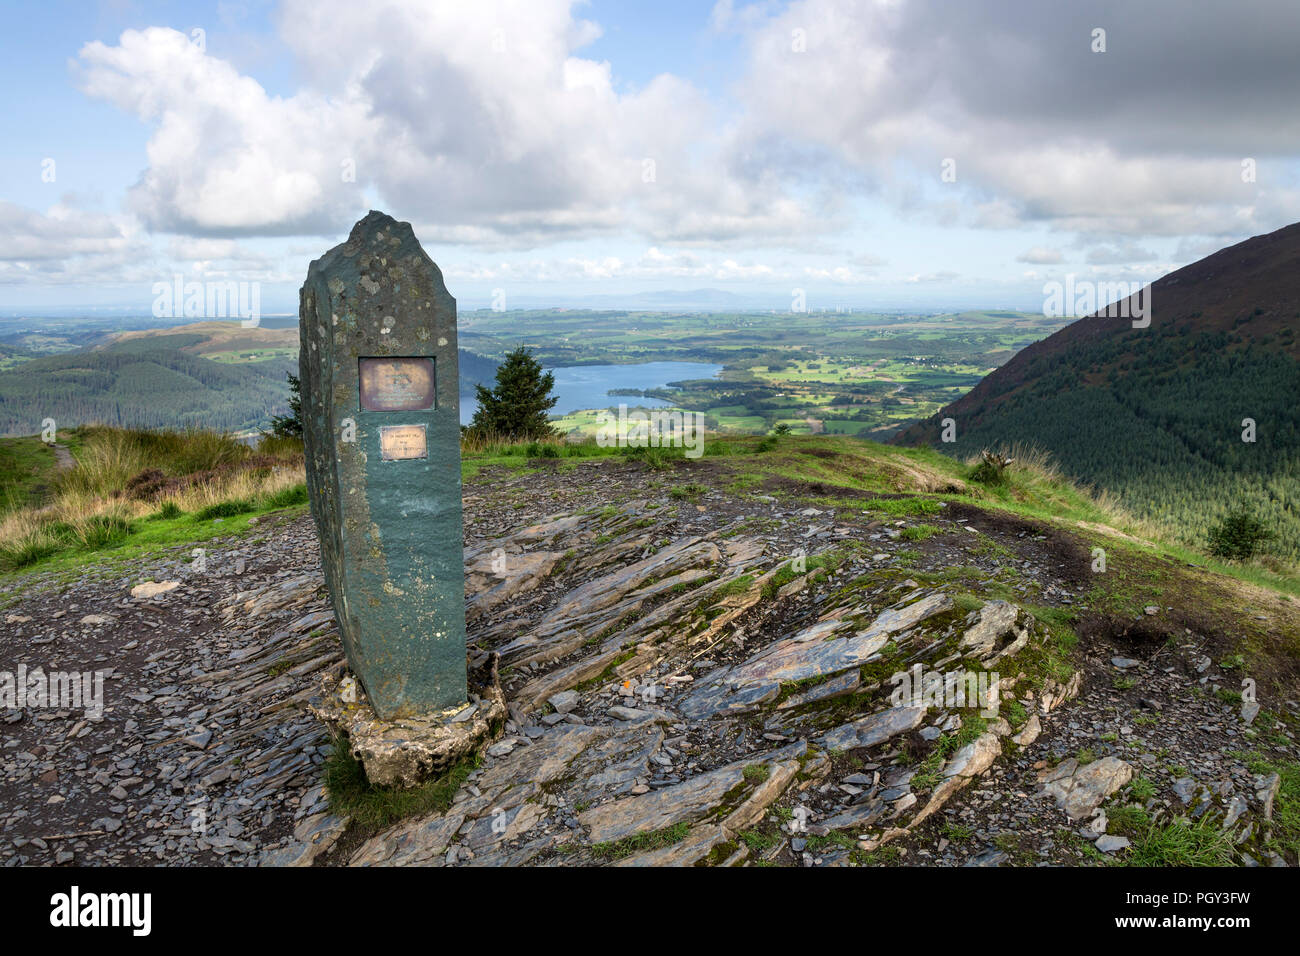 The Summit of Dodd and the View Over Bassenthwaite Lake Towards the Solway Firth and Scotland, Lake District, Cumbria, UK. Stock Photo